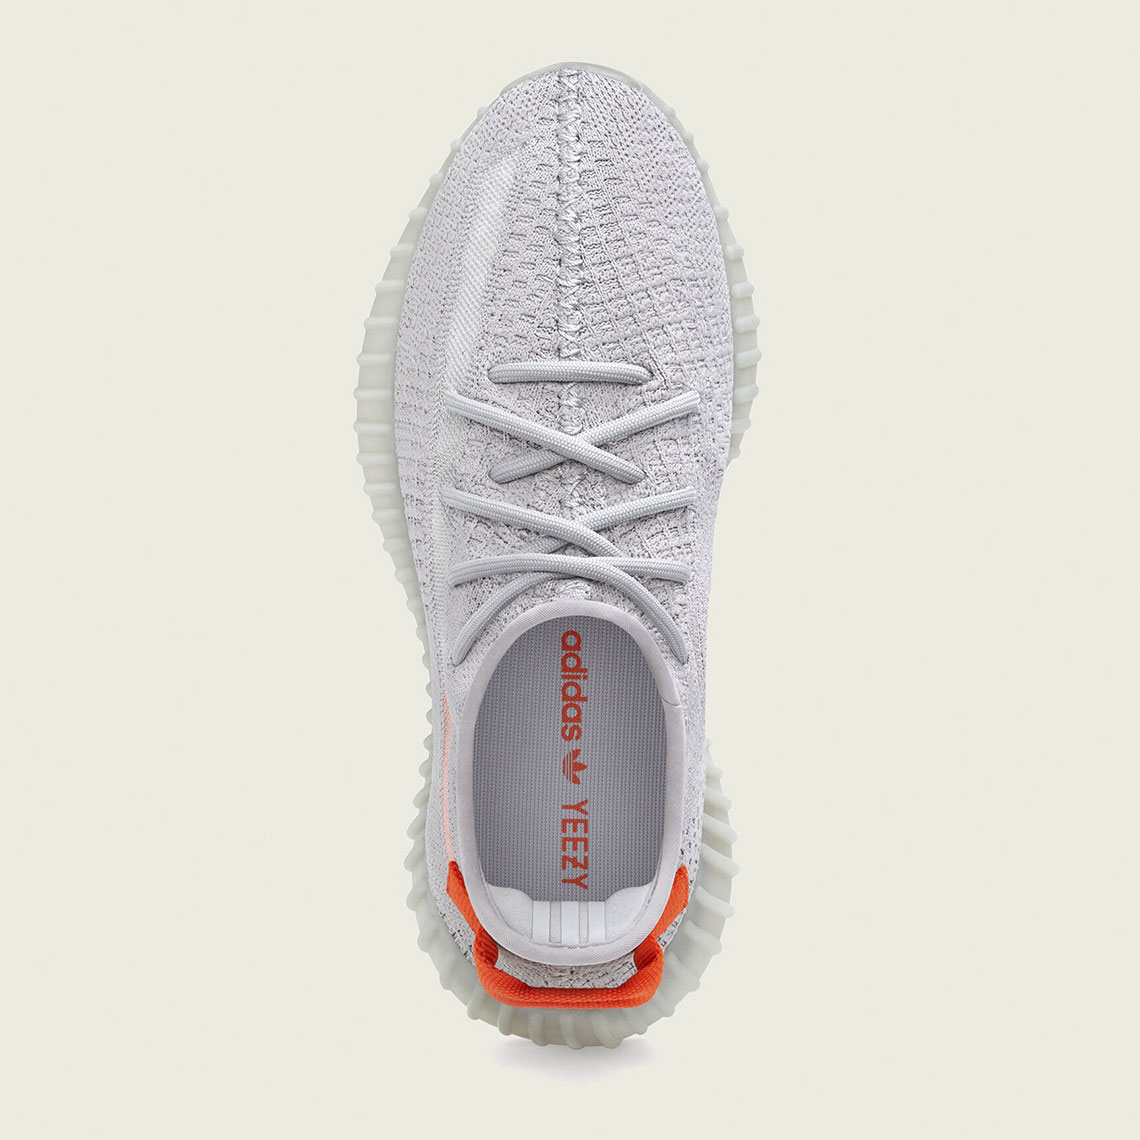 yeezy-boost-350-v2-tail-light-release-date-2